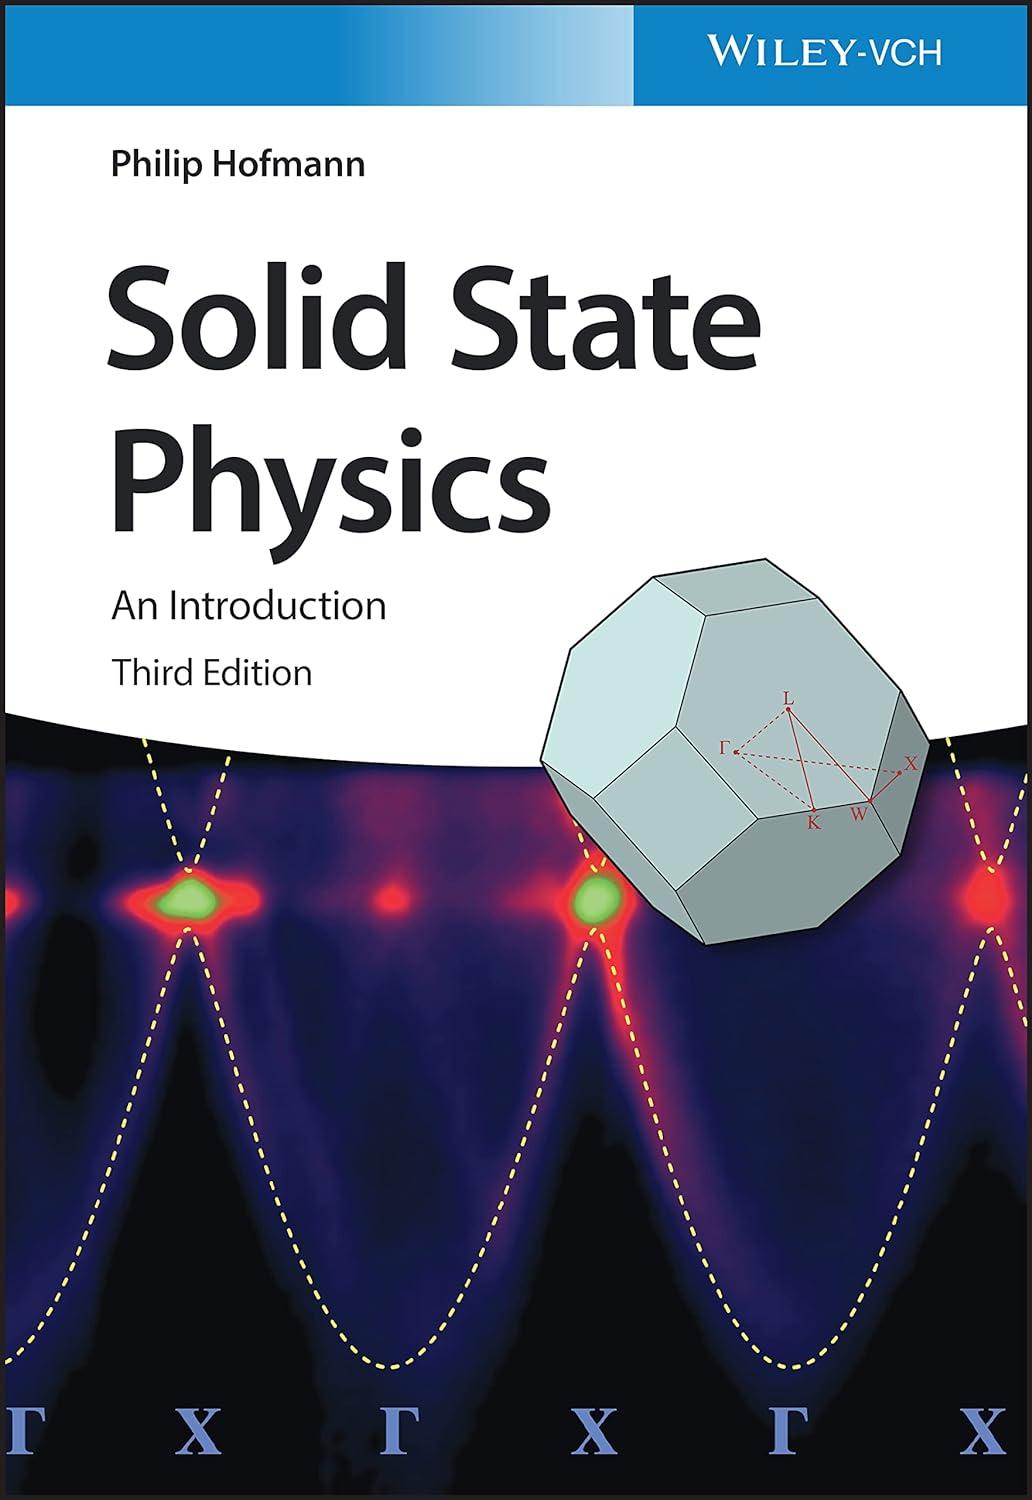 solid state physics an introduction 3rd edition philip hofmann 352741410x, 978-3527414109